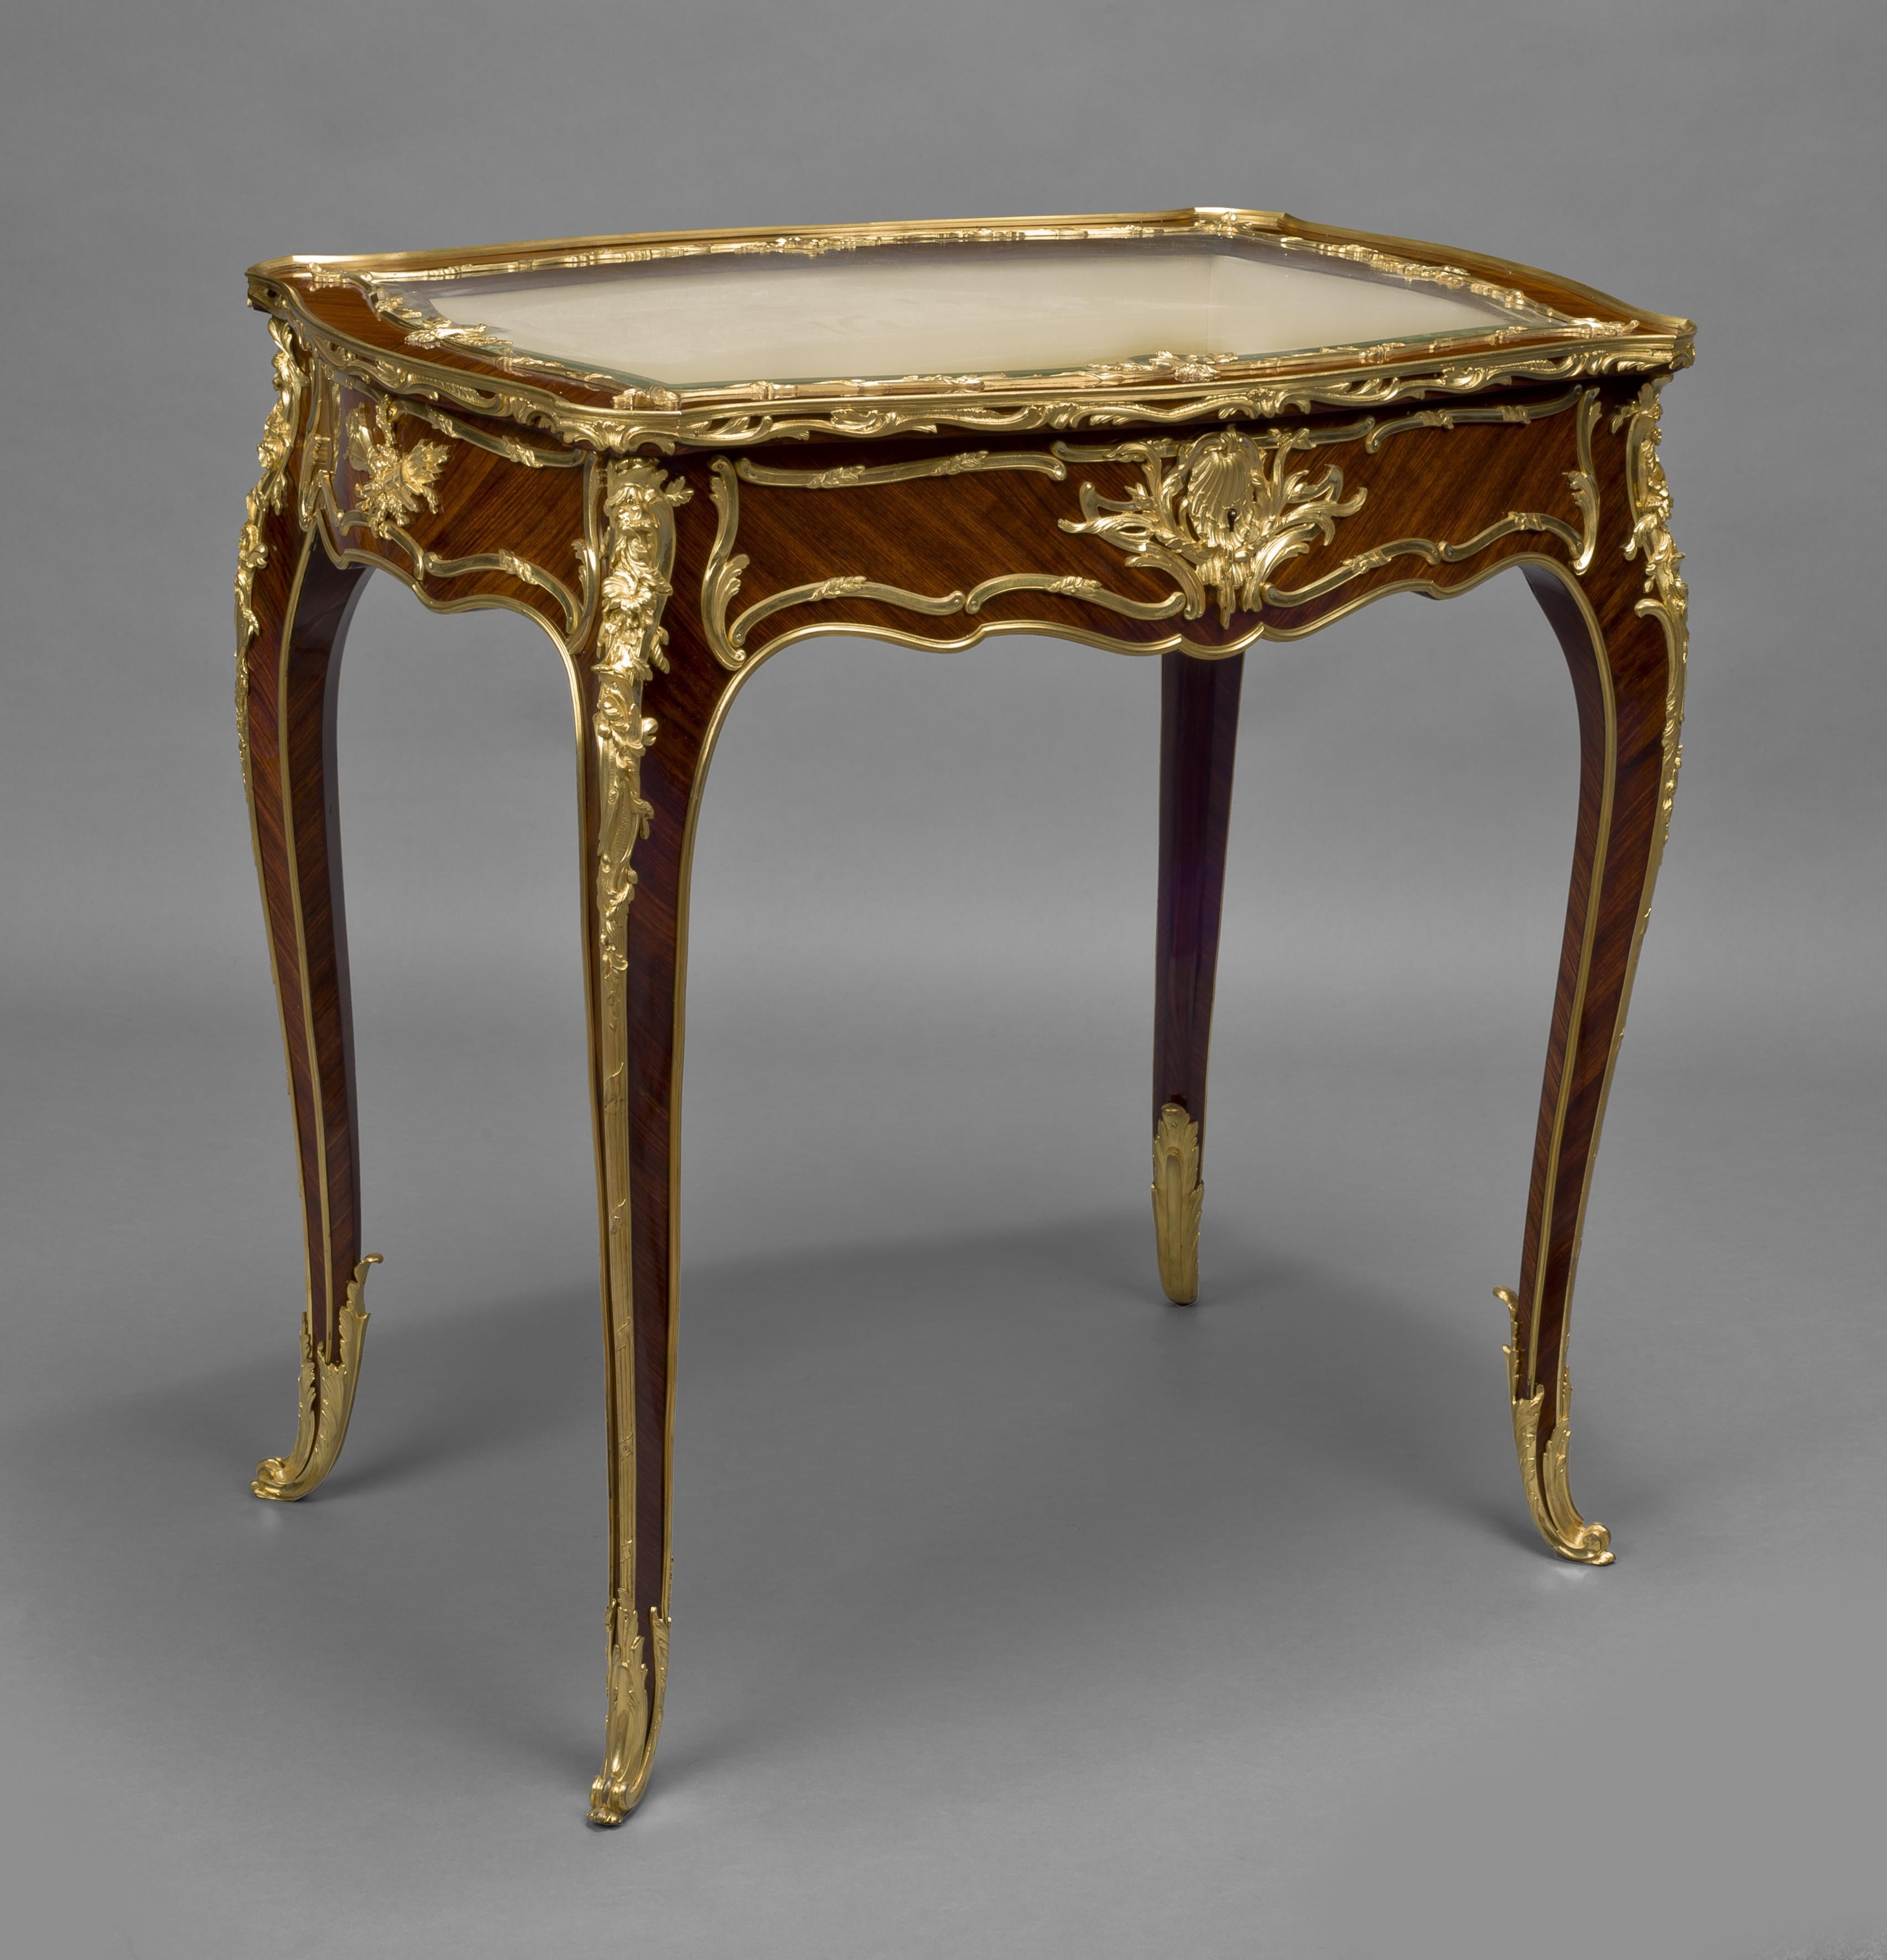 A Fine Louis XV Style Gilt-Bronze Mounted Table Vitrine by François Linke. 

French, circa 1900. 

Linke Index Number 131. 

The lockplate signed 'F.Linke', the mounts variously incised 'FL', the escutcheon stamped 'FL 2385'. The lock plate